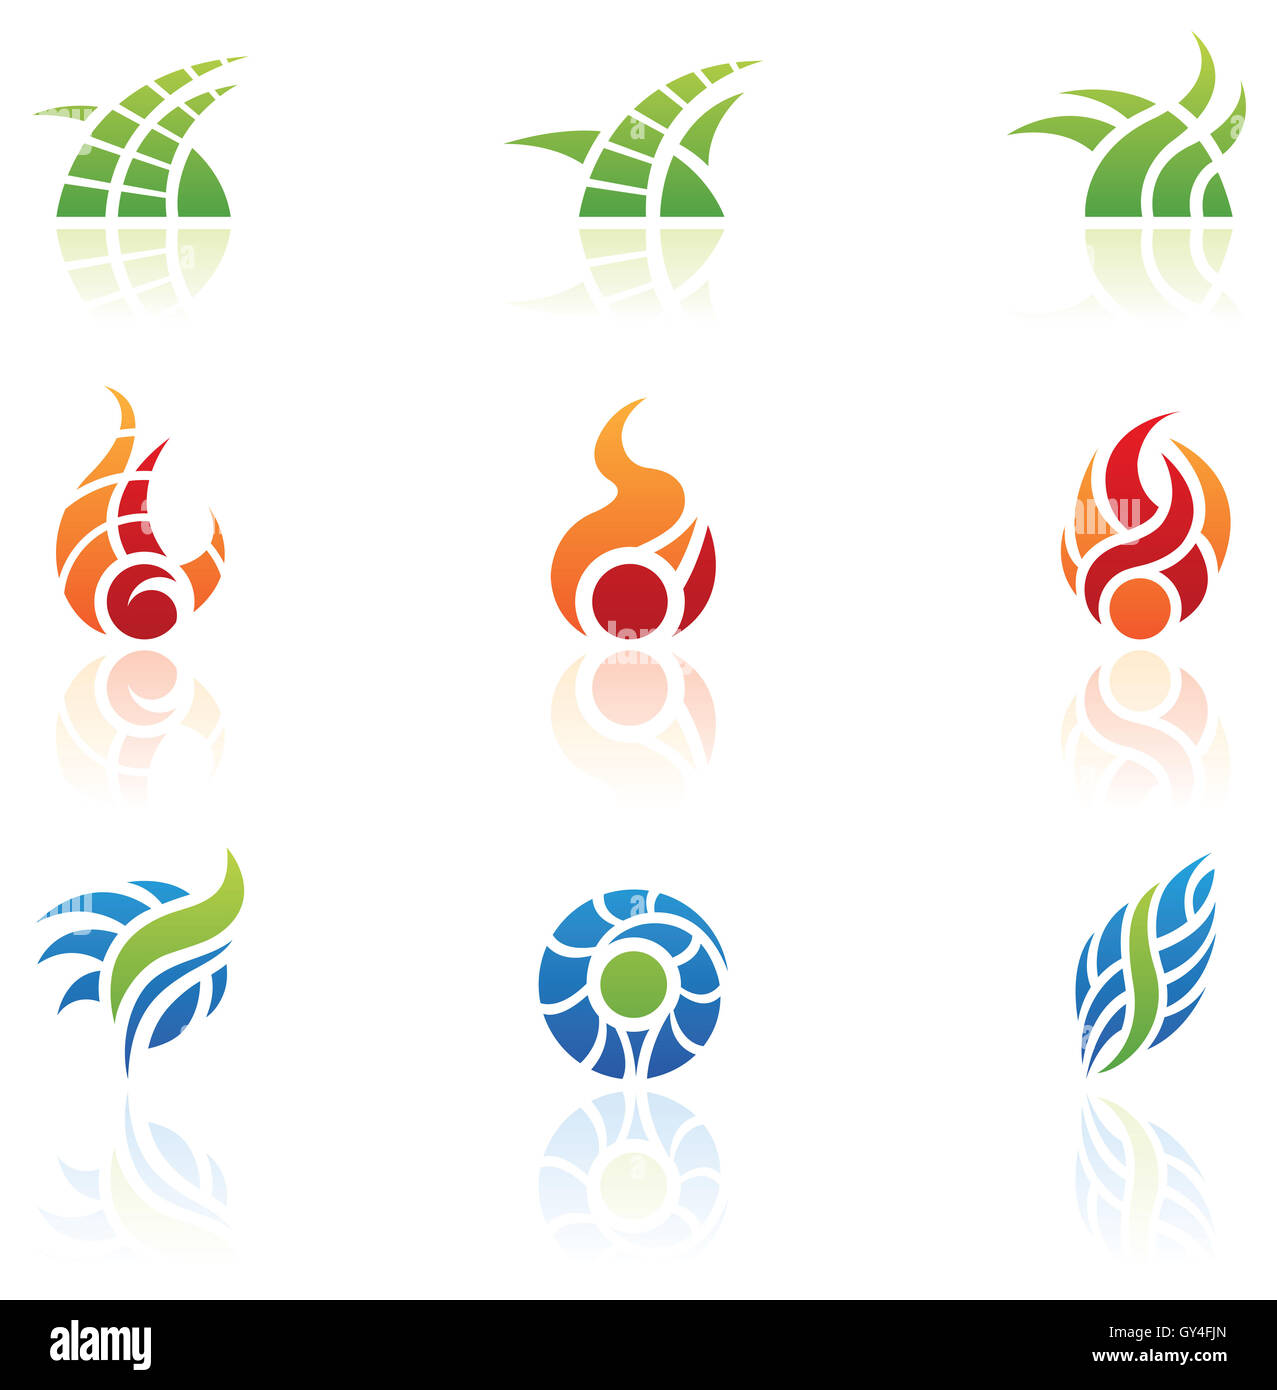 various nature elements icons, isolated Stock Photo